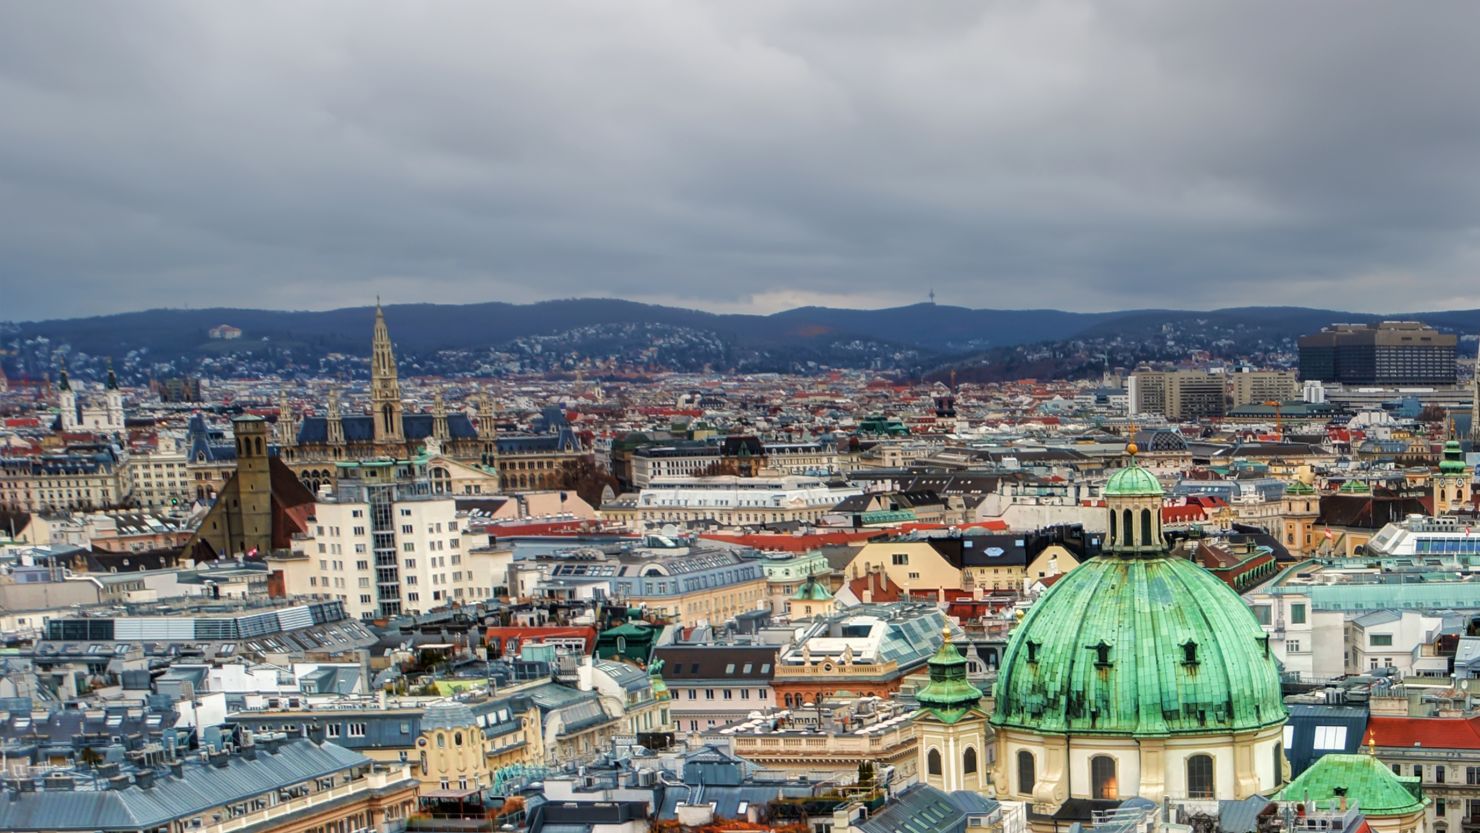 Aerial scenic view of city center from St. Stephen's Cathedral in Vienna, Austria